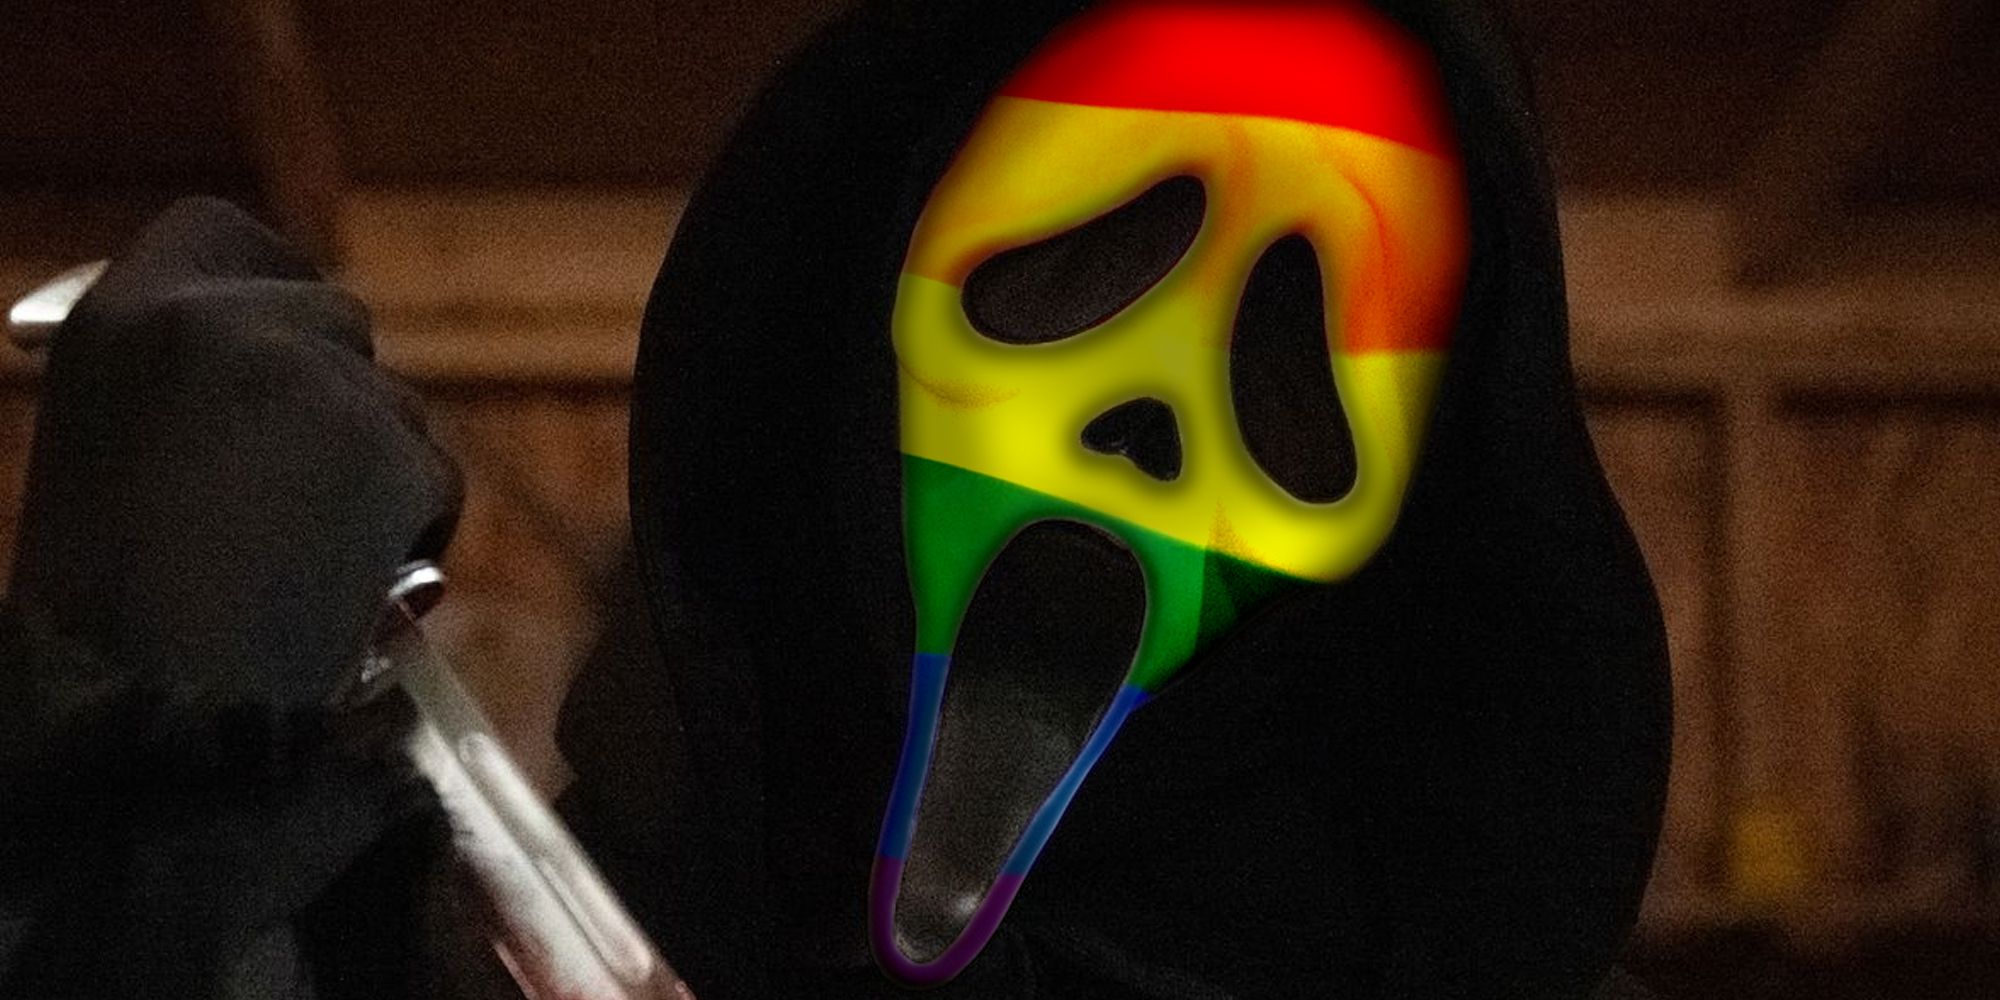 Ghostface from Scream but their mask is the LGBTQ flag